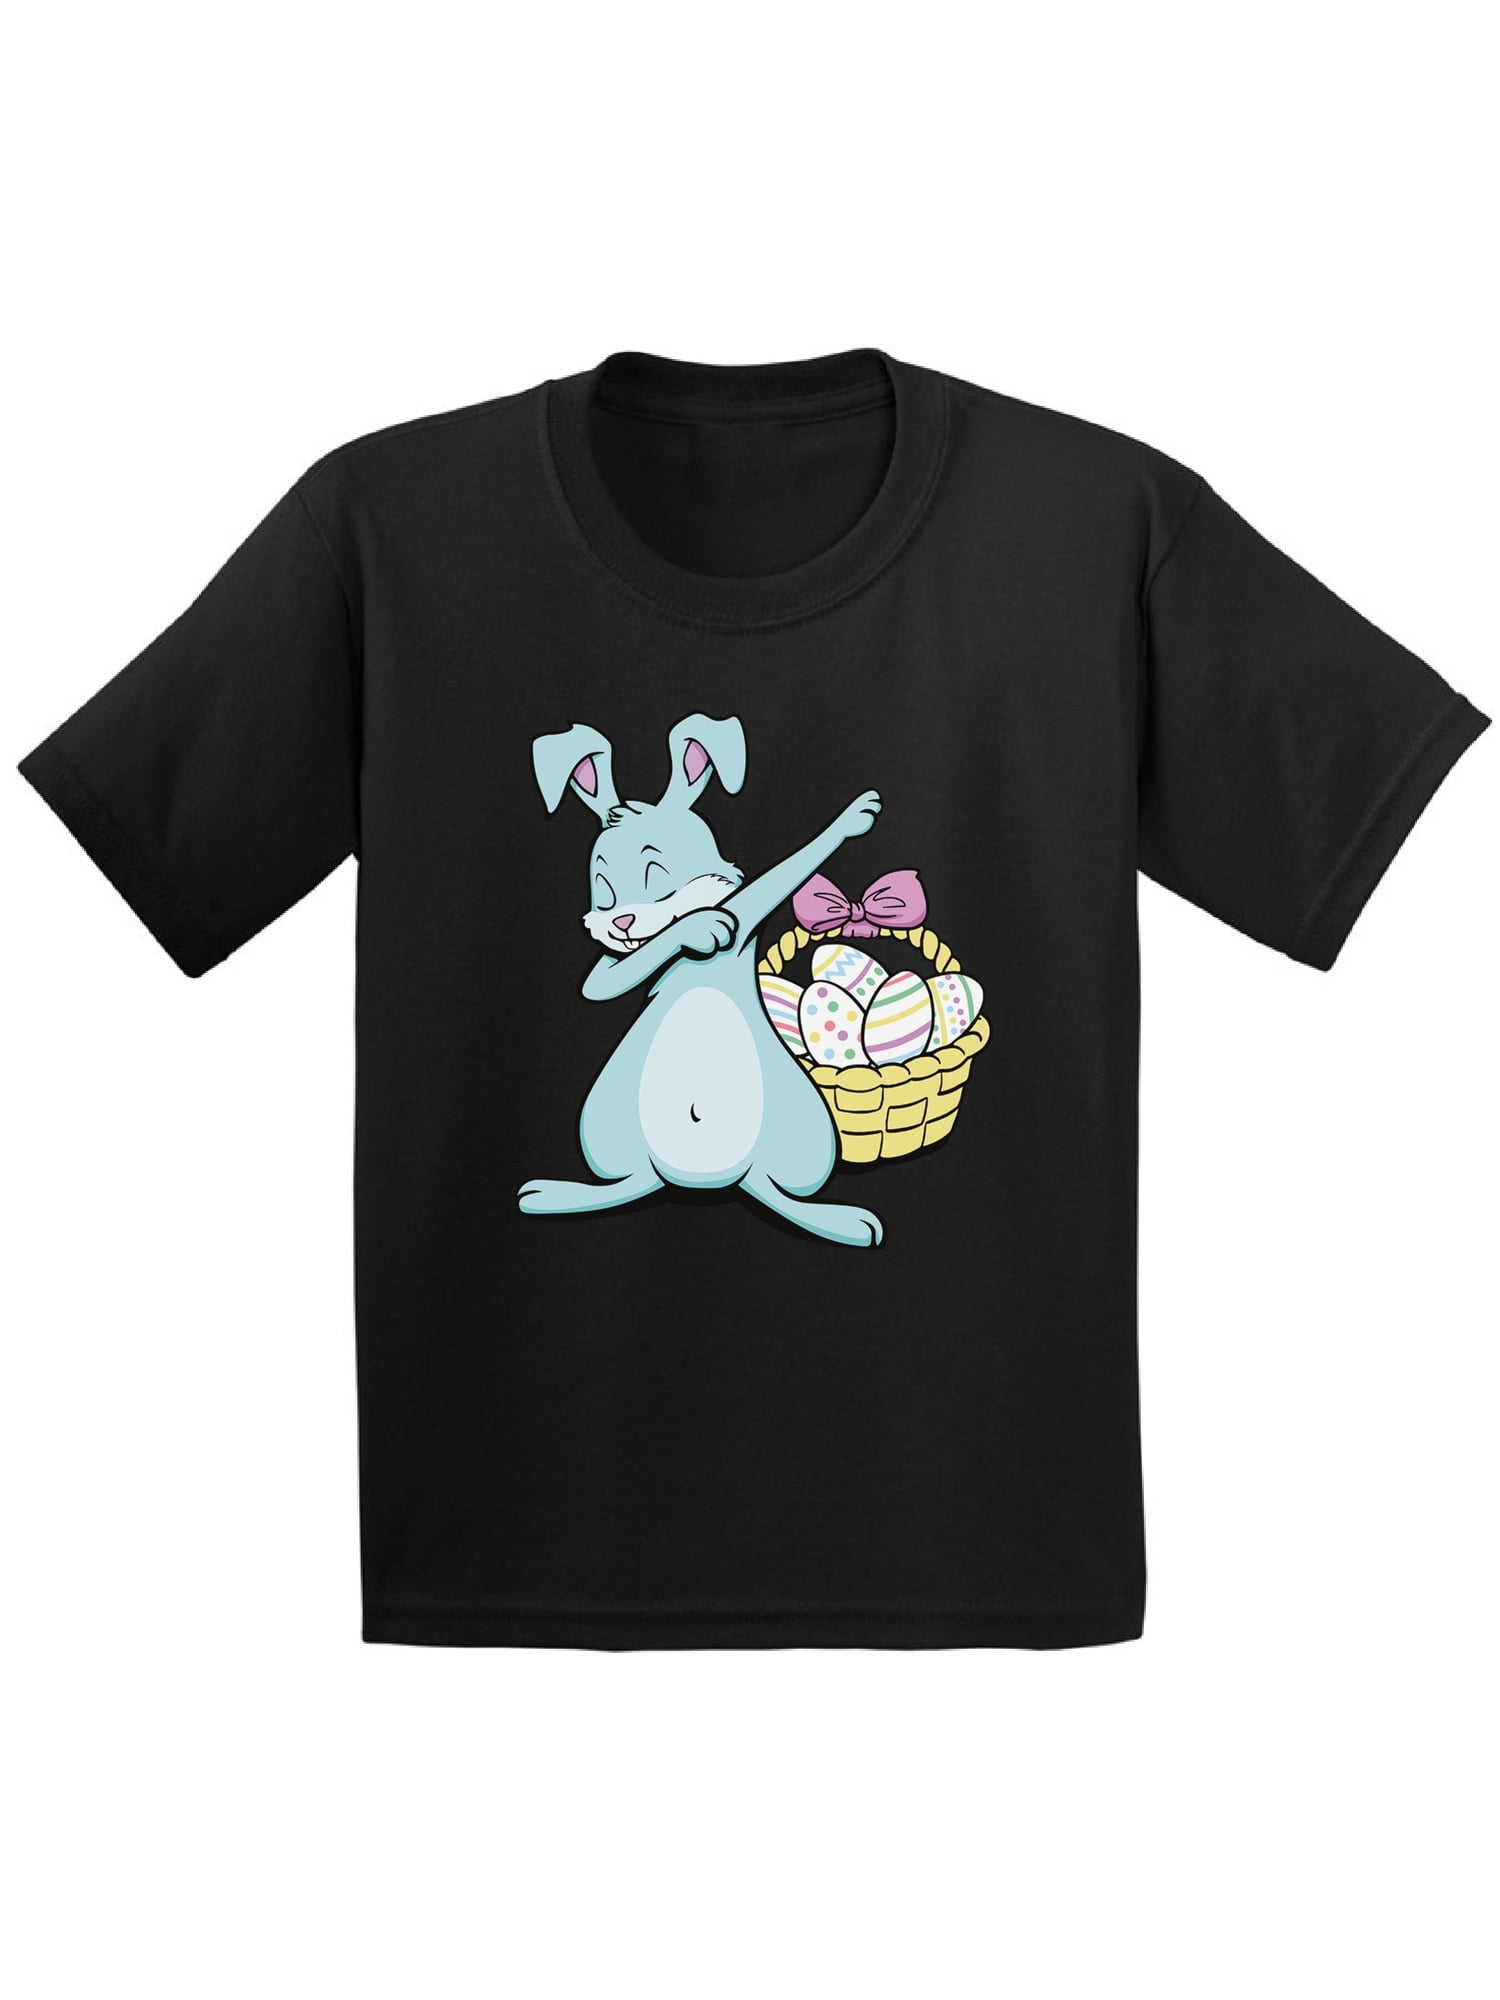 Easter Shirt For Woman Easter Day Shirt You Are My Chocolate Bunny Easter Bunny Shirt Happy Easter Shirt Cute Easter Shirt